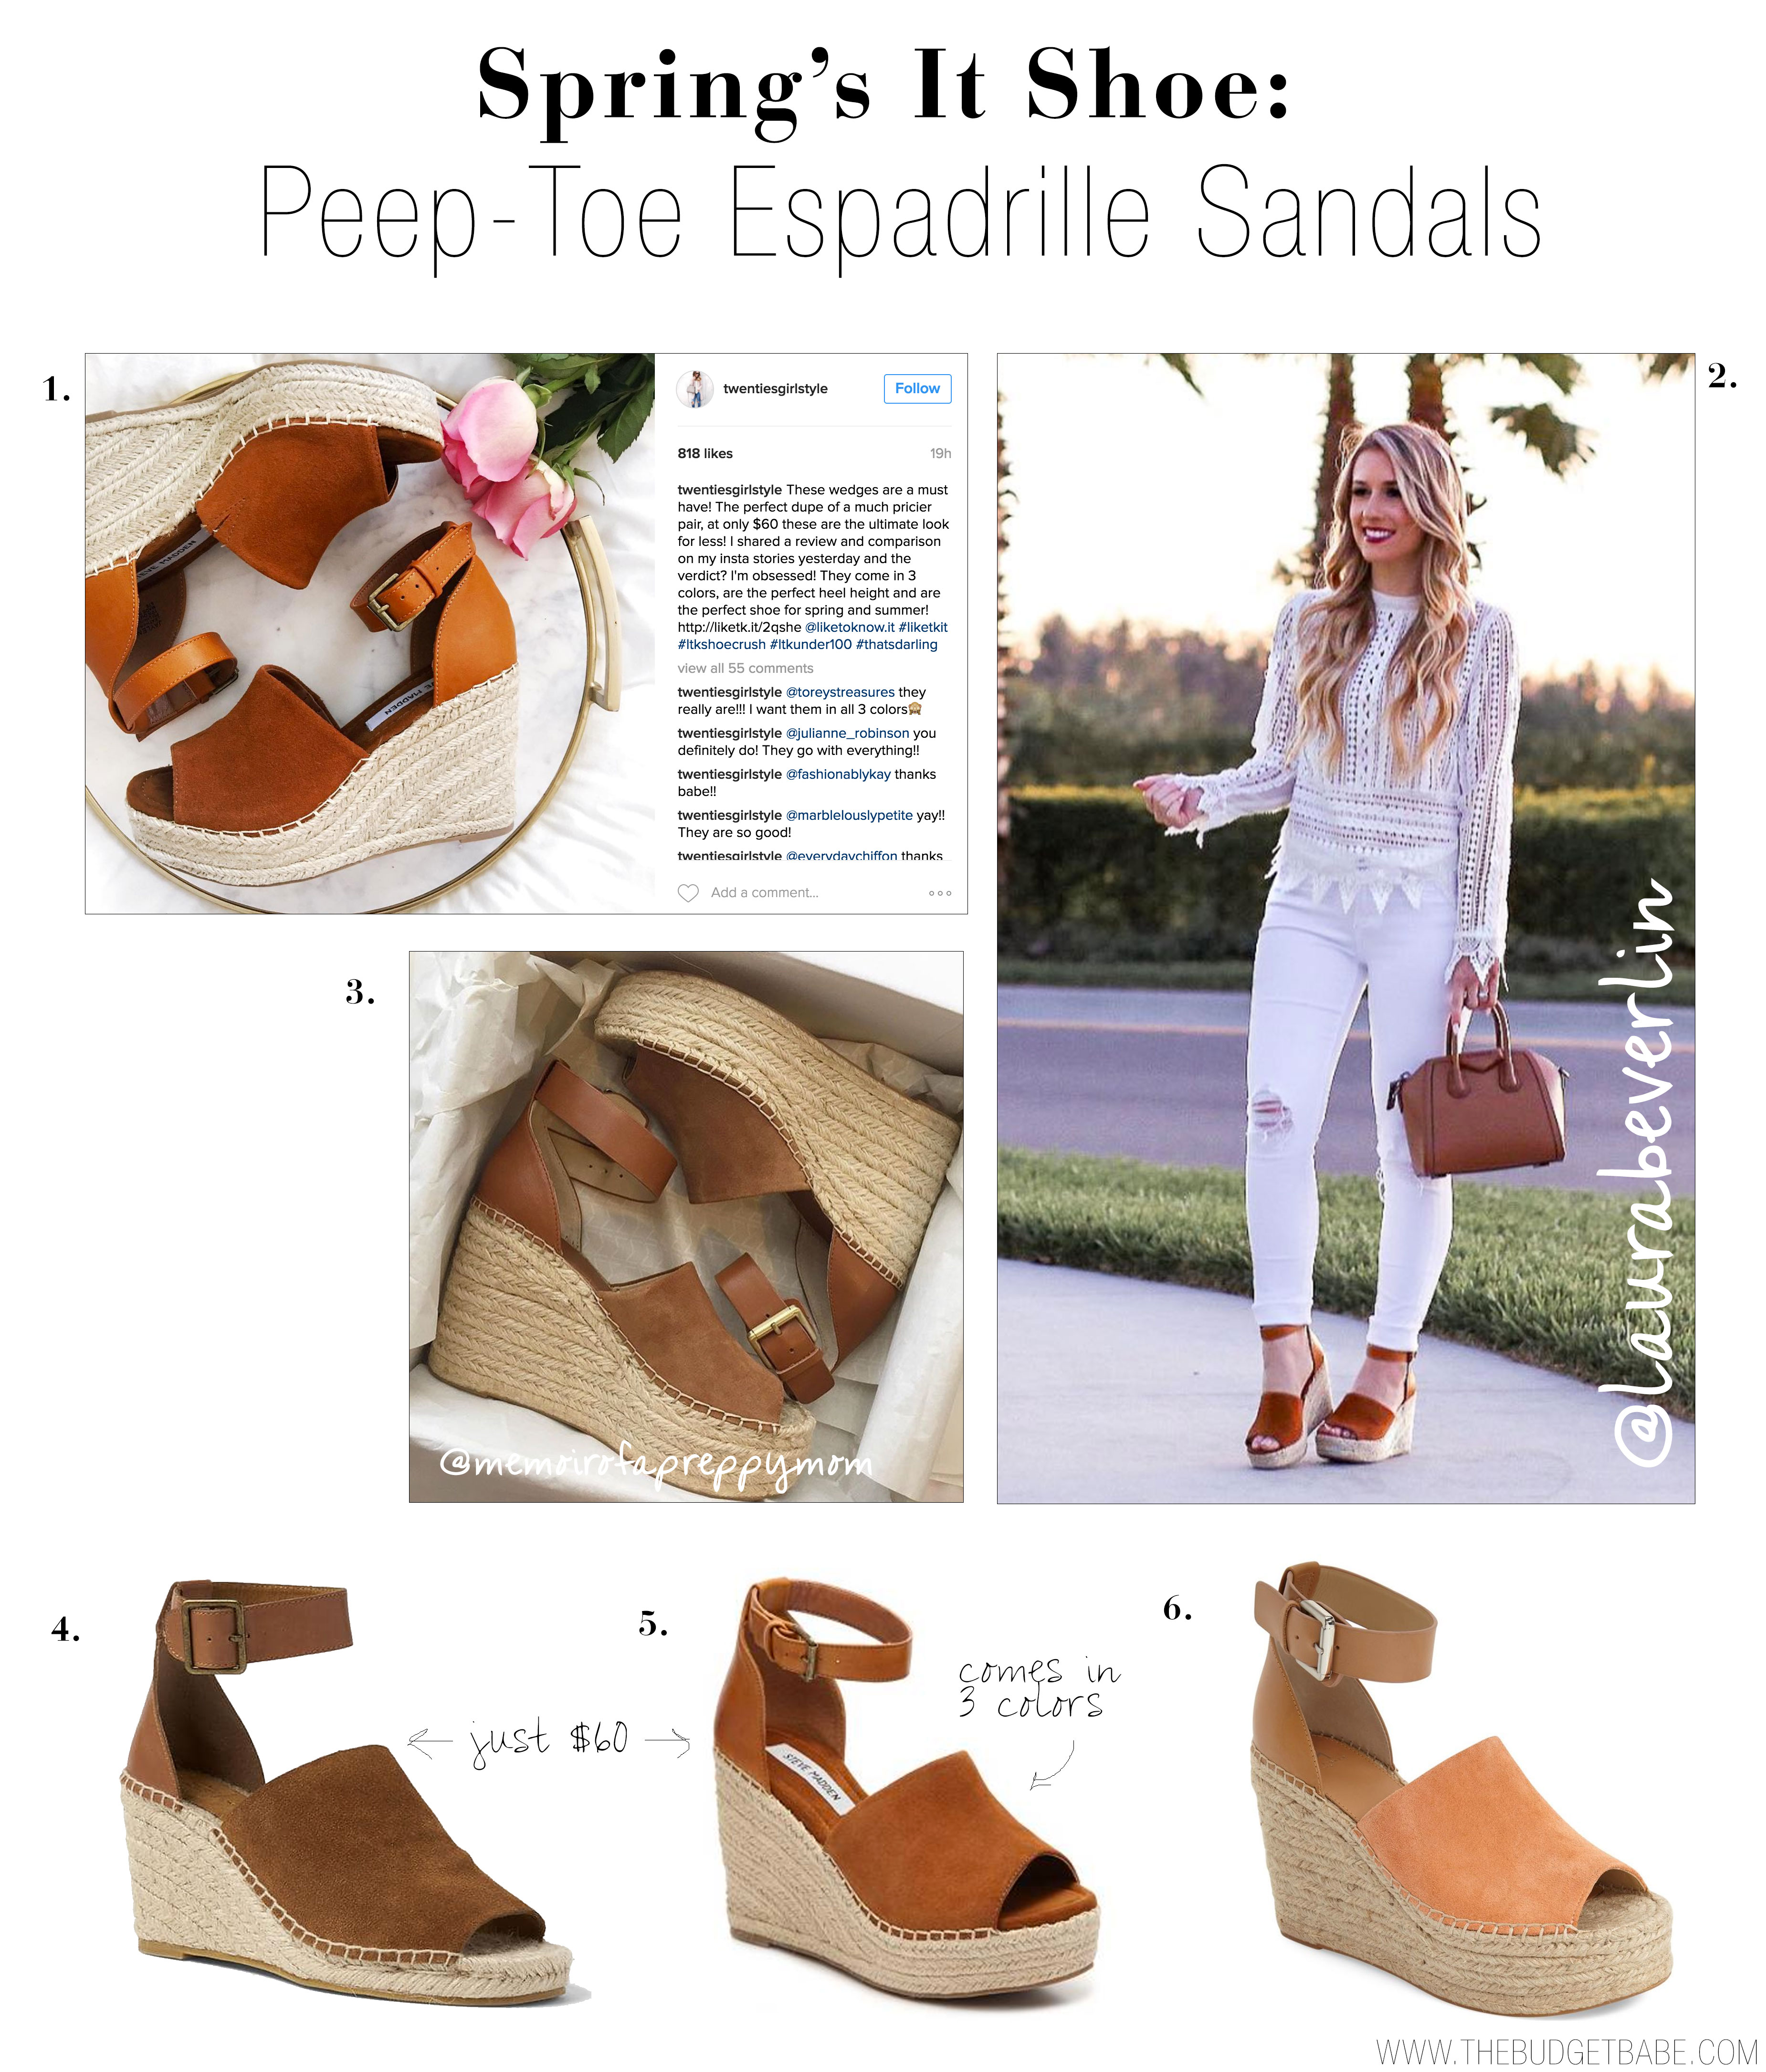 Spring's it shoe looks like it's going to be a peep-toe espadrille sandal with a chic and functional ankle strap.